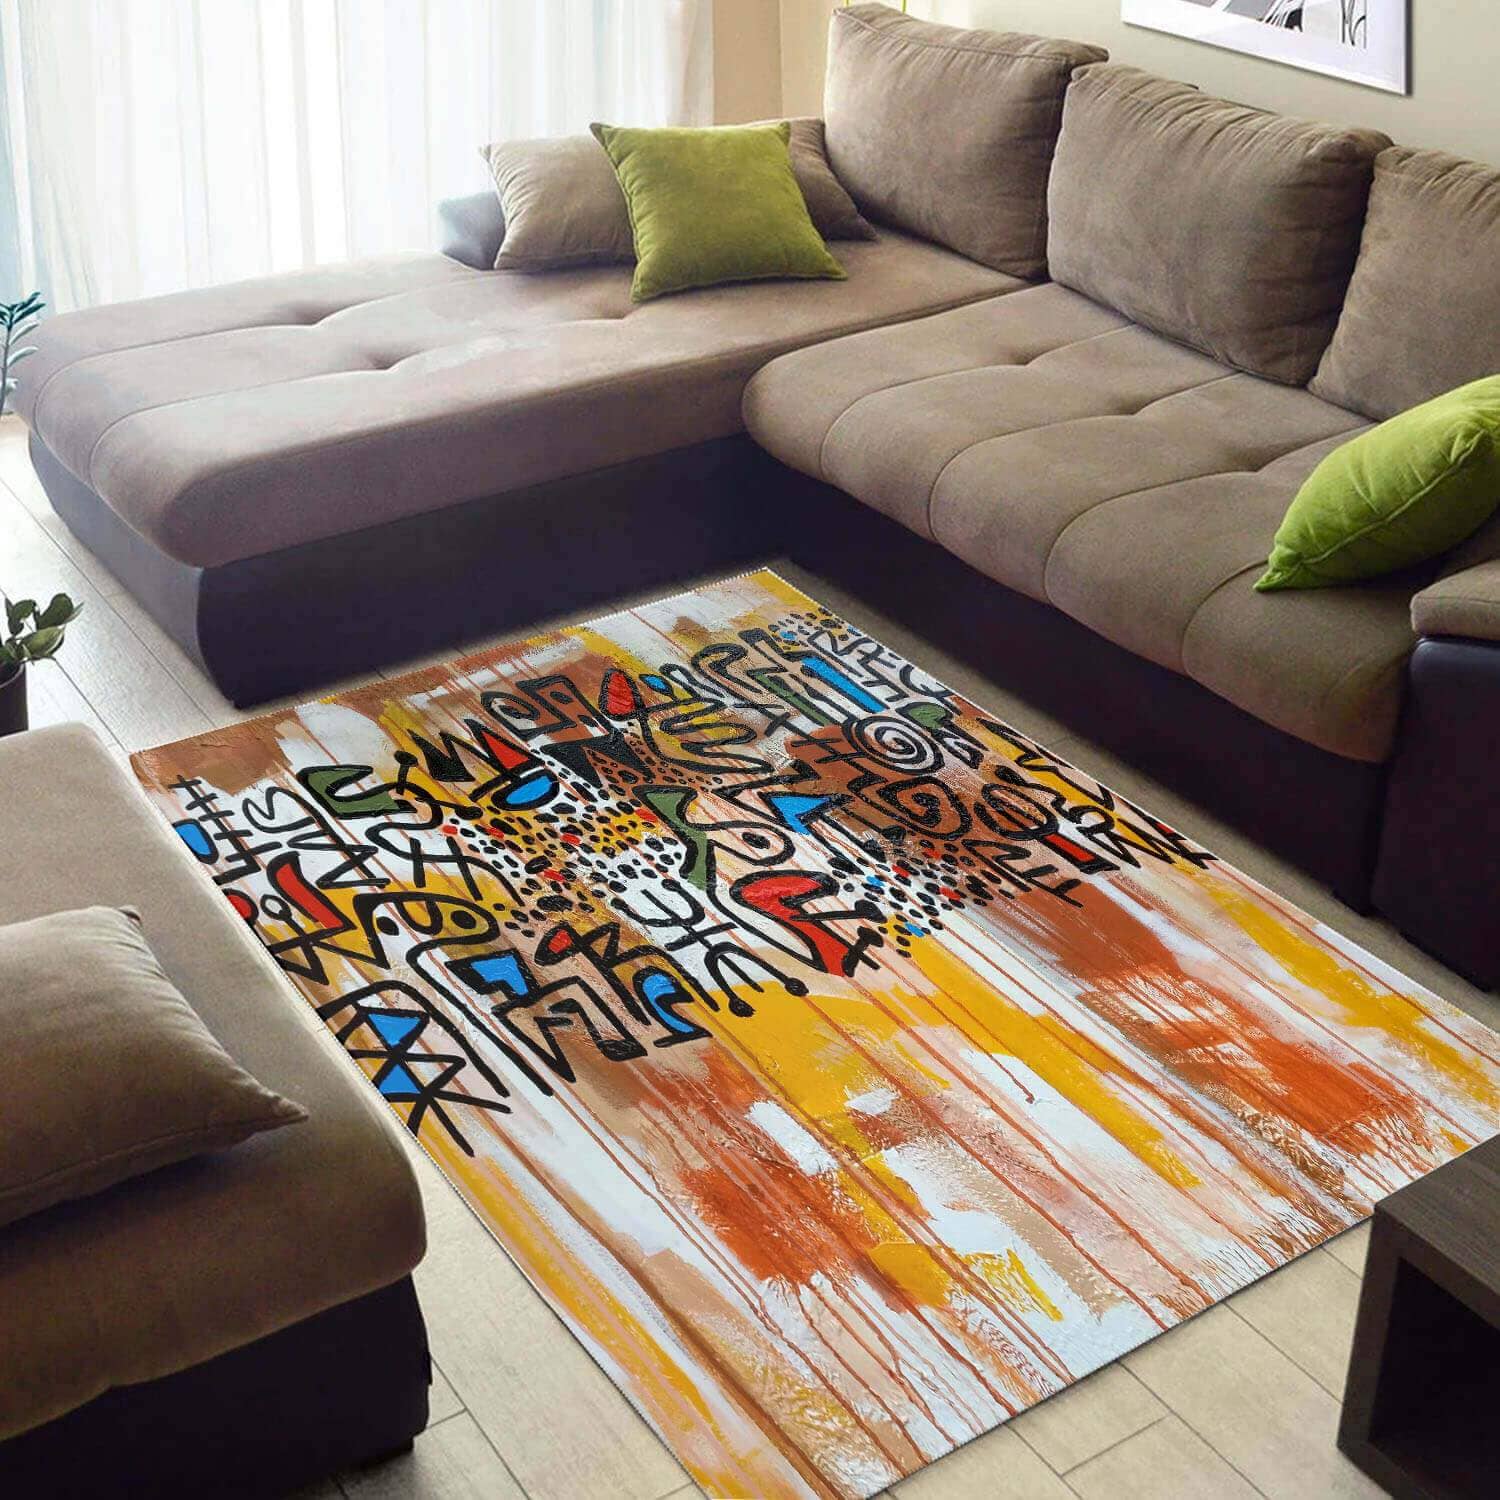 Nice African Attractive American Ethnic Seamless Pattern Themed Carpet Living Room Rug